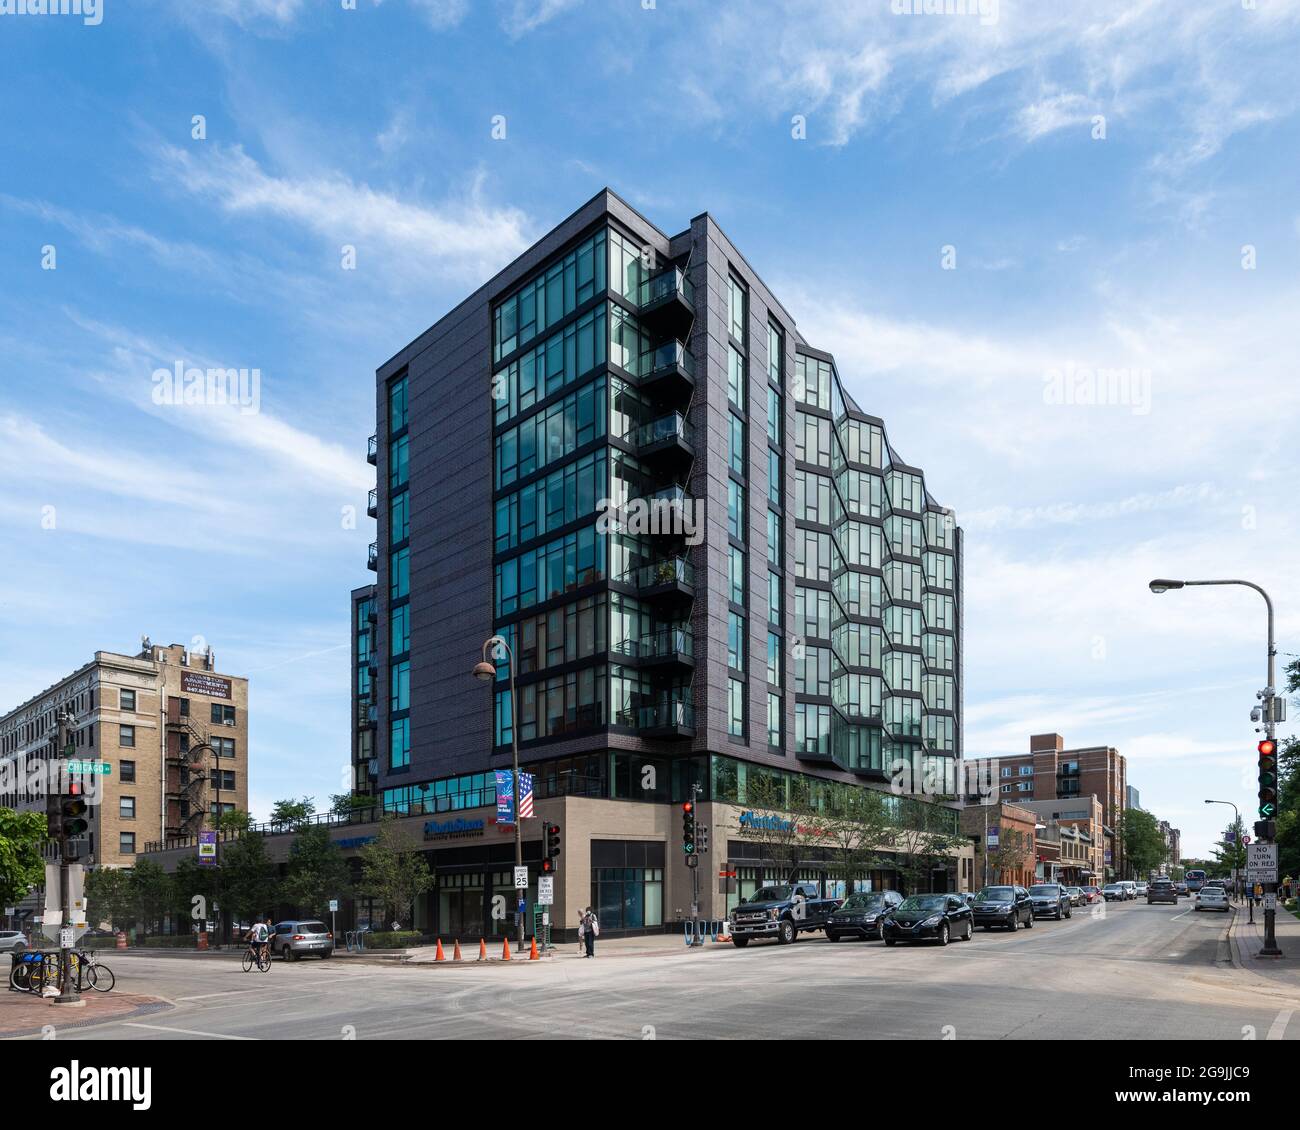 Mixed-use residential commercial building in Evanston Stock Photo